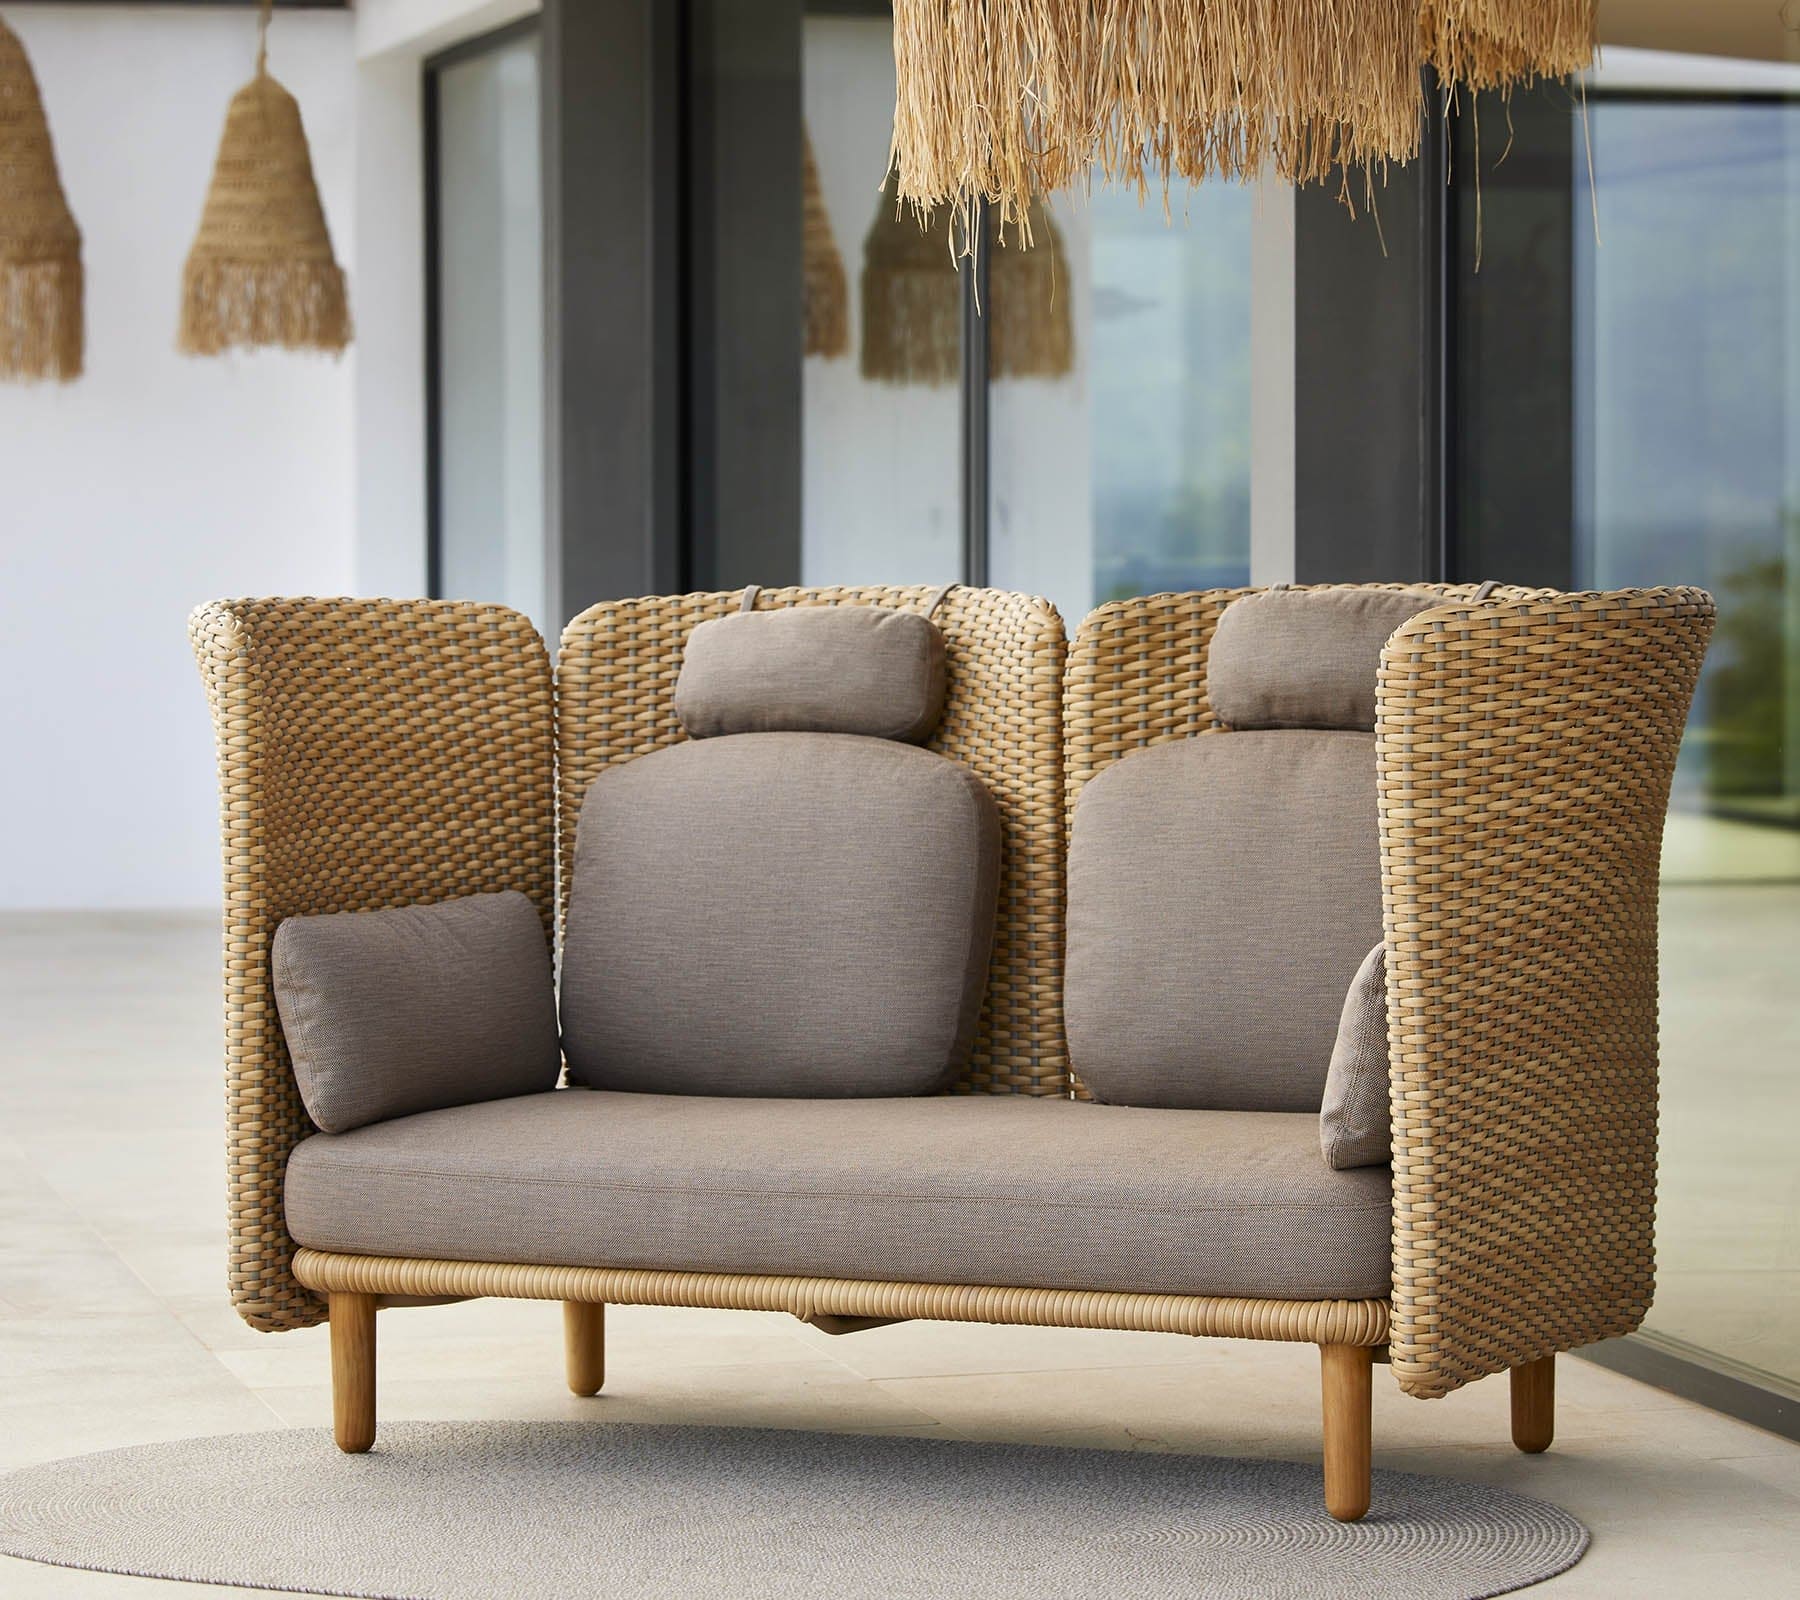 Boxhill's Arch 2-Seater Outdoor Sofa | High Arm/Back lifestyle image